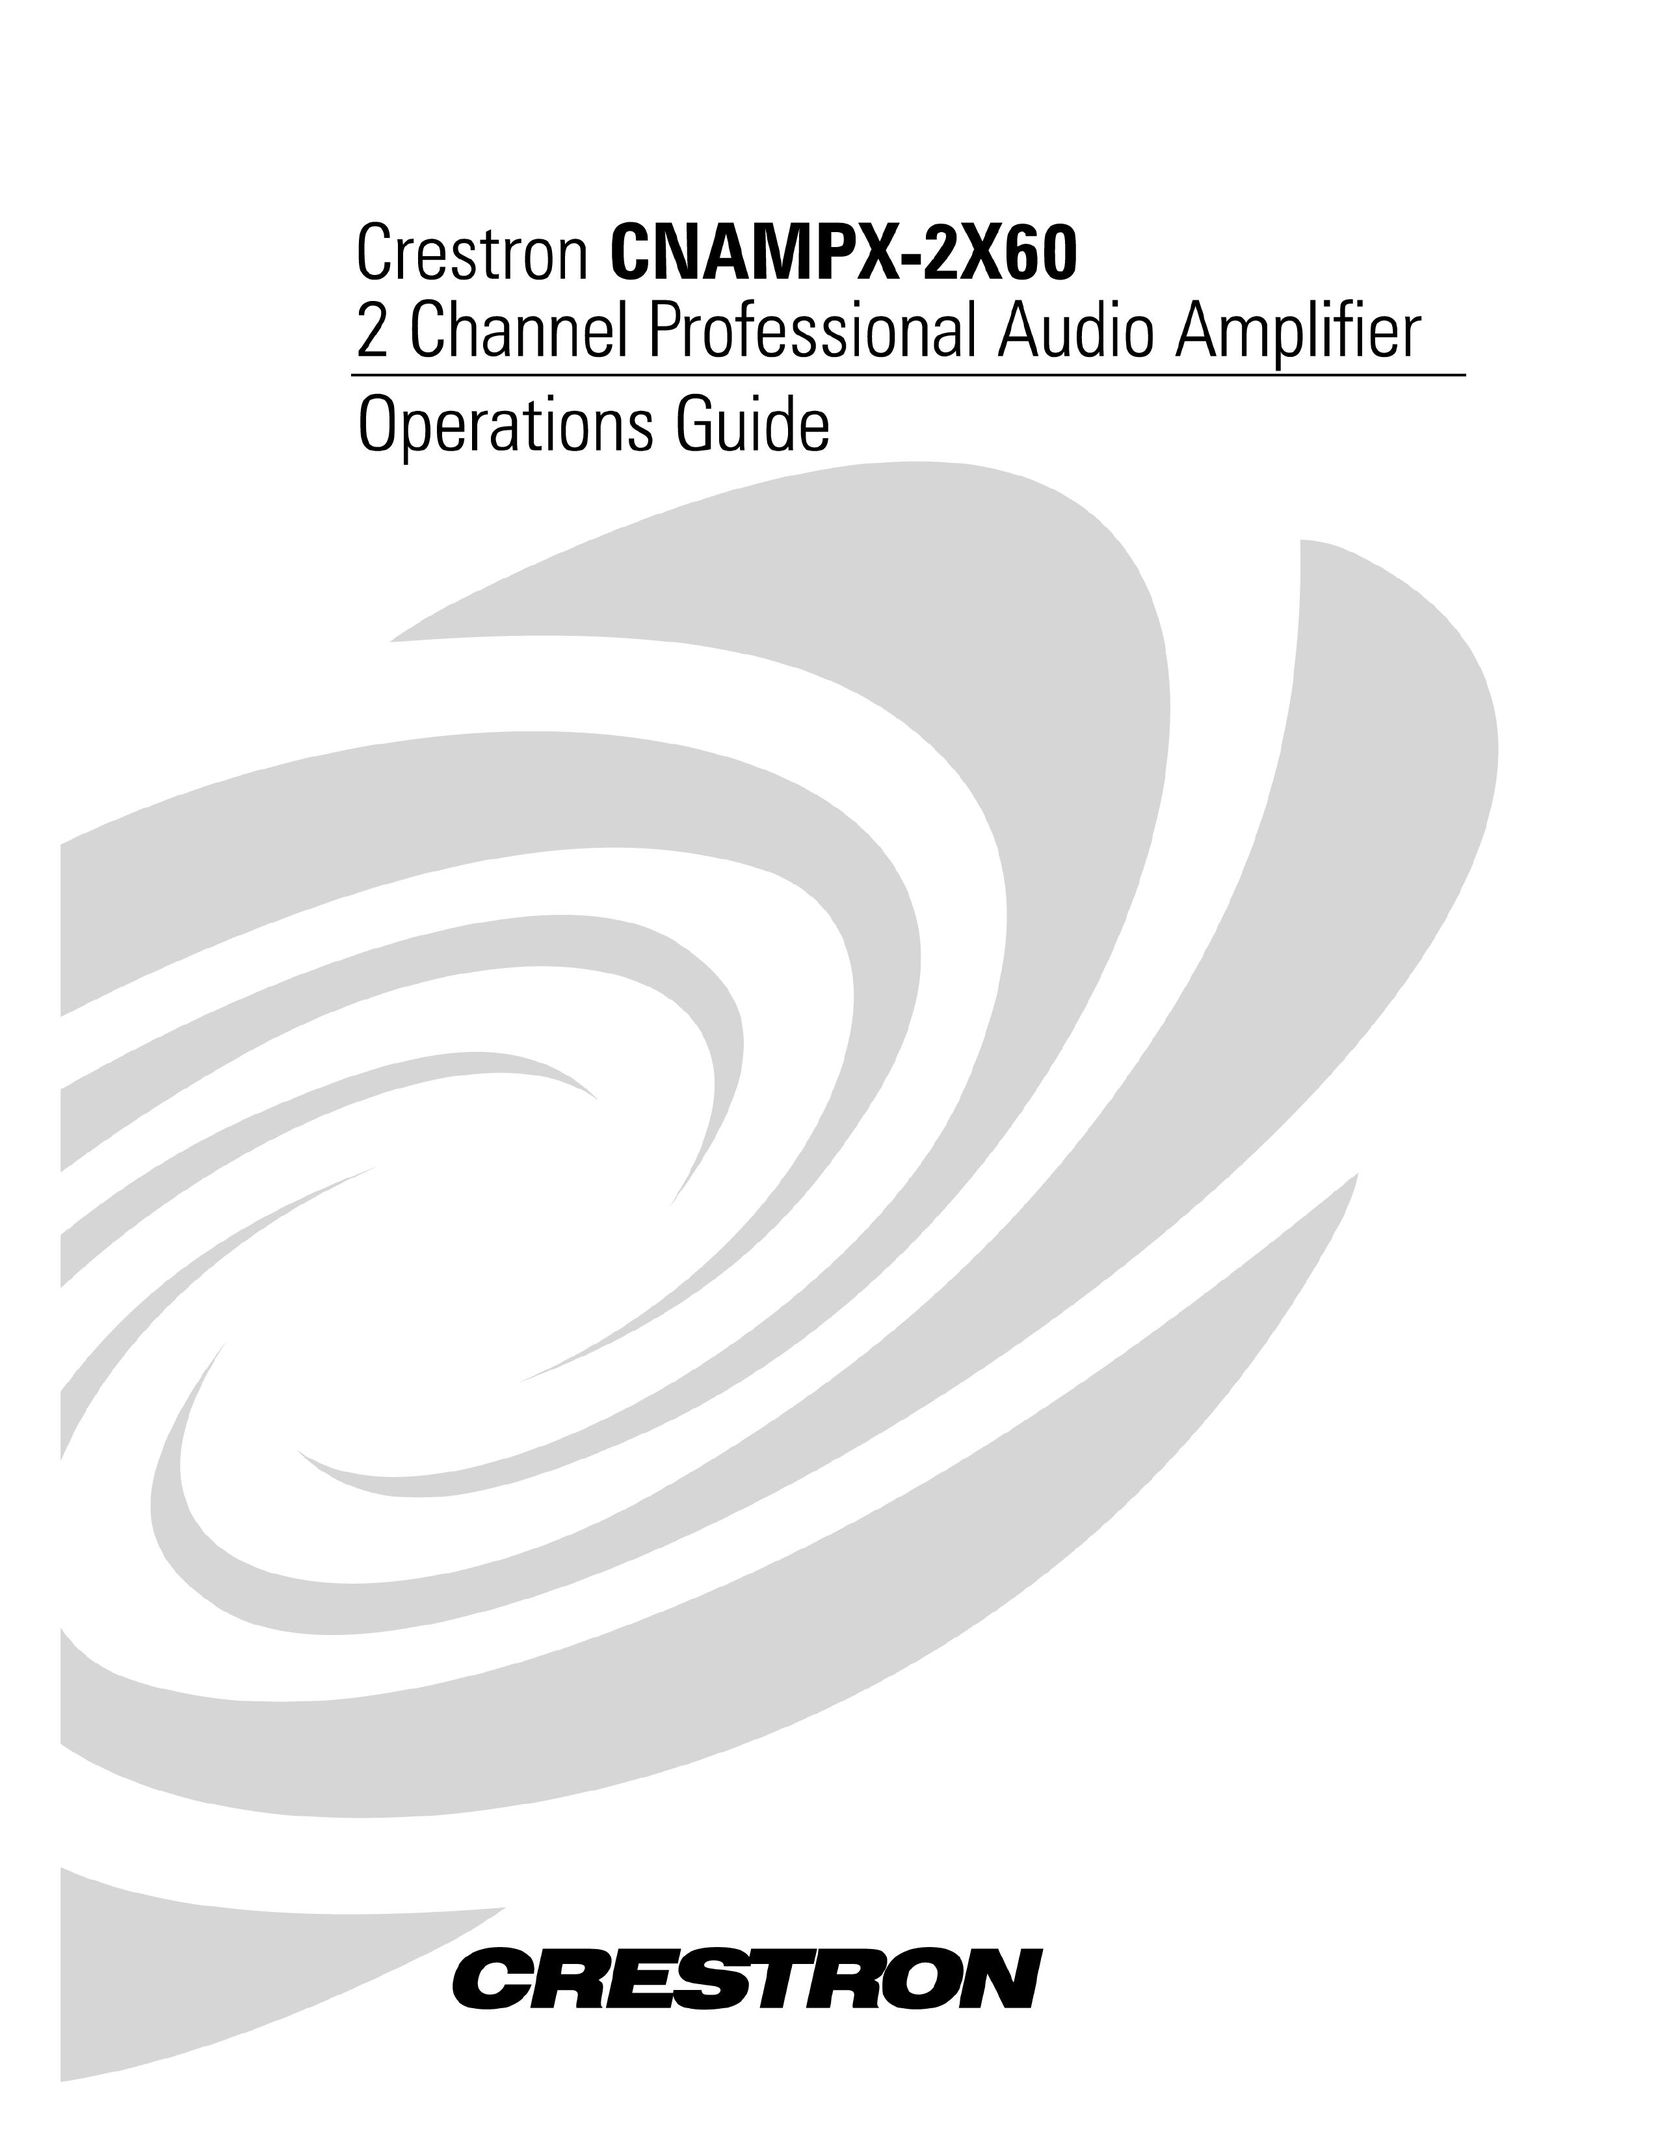 Crestron electronic CNAMPX-2X60 Stereo Amplifier User Manual